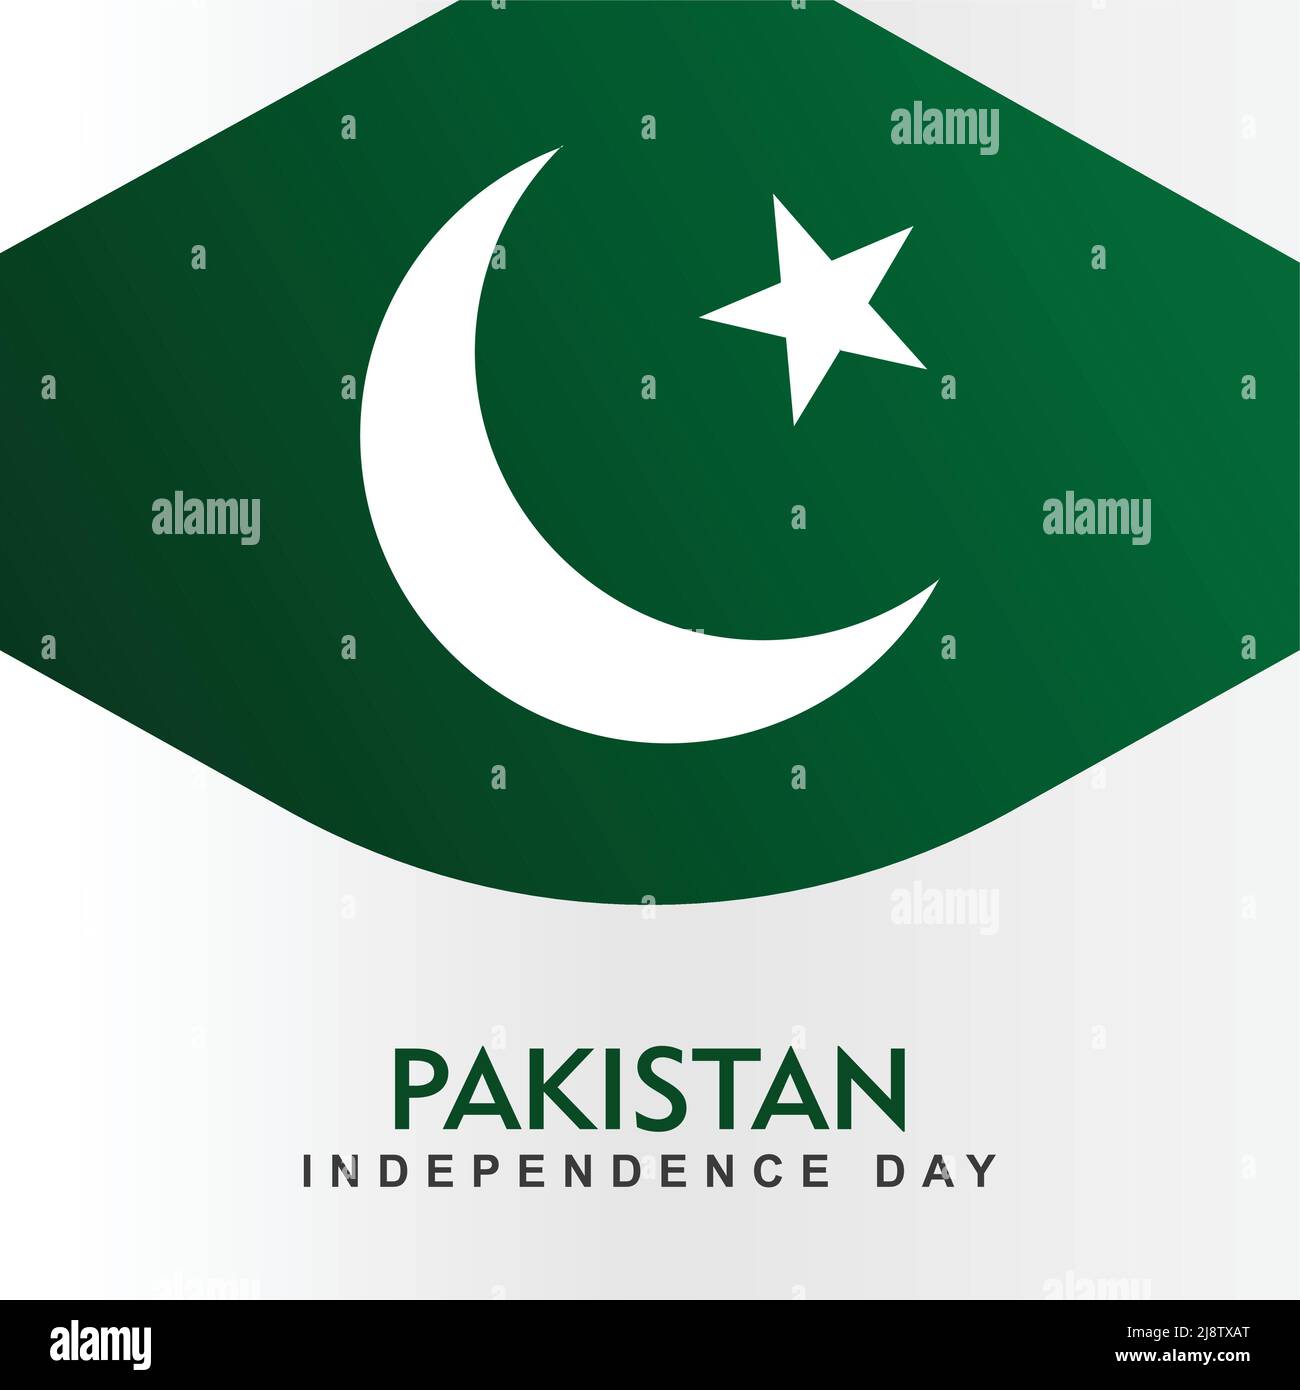 Pakistan flag moon and star at top center, Pakistan independence day background Stock Vector